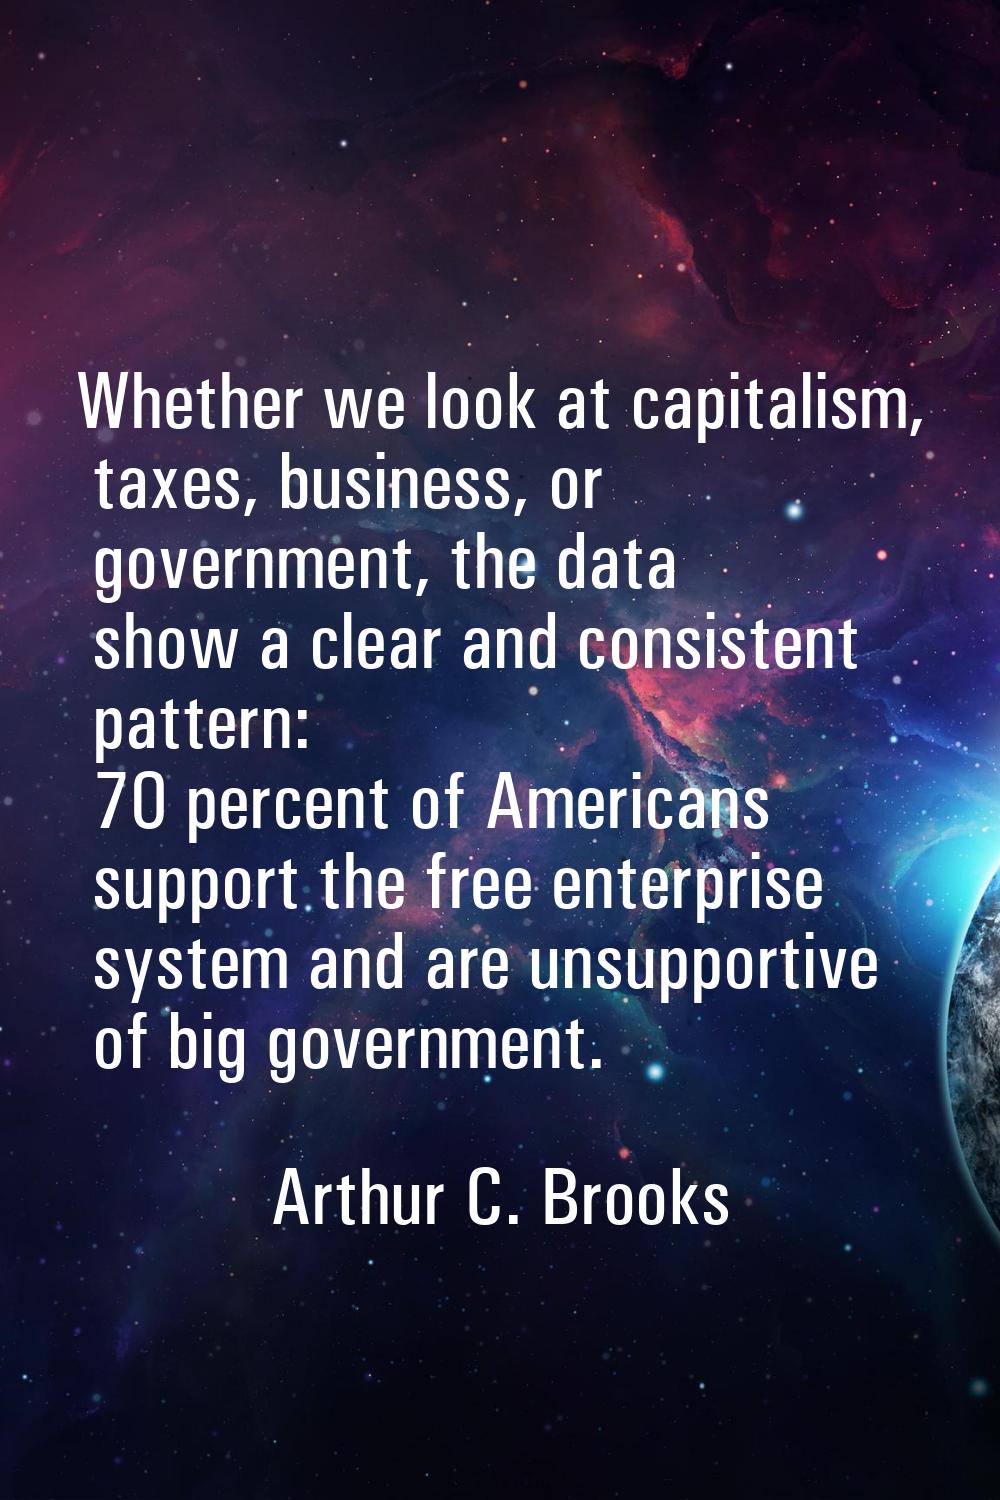 Whether we look at capitalism, taxes, business, or government, the data show a clear and consistent